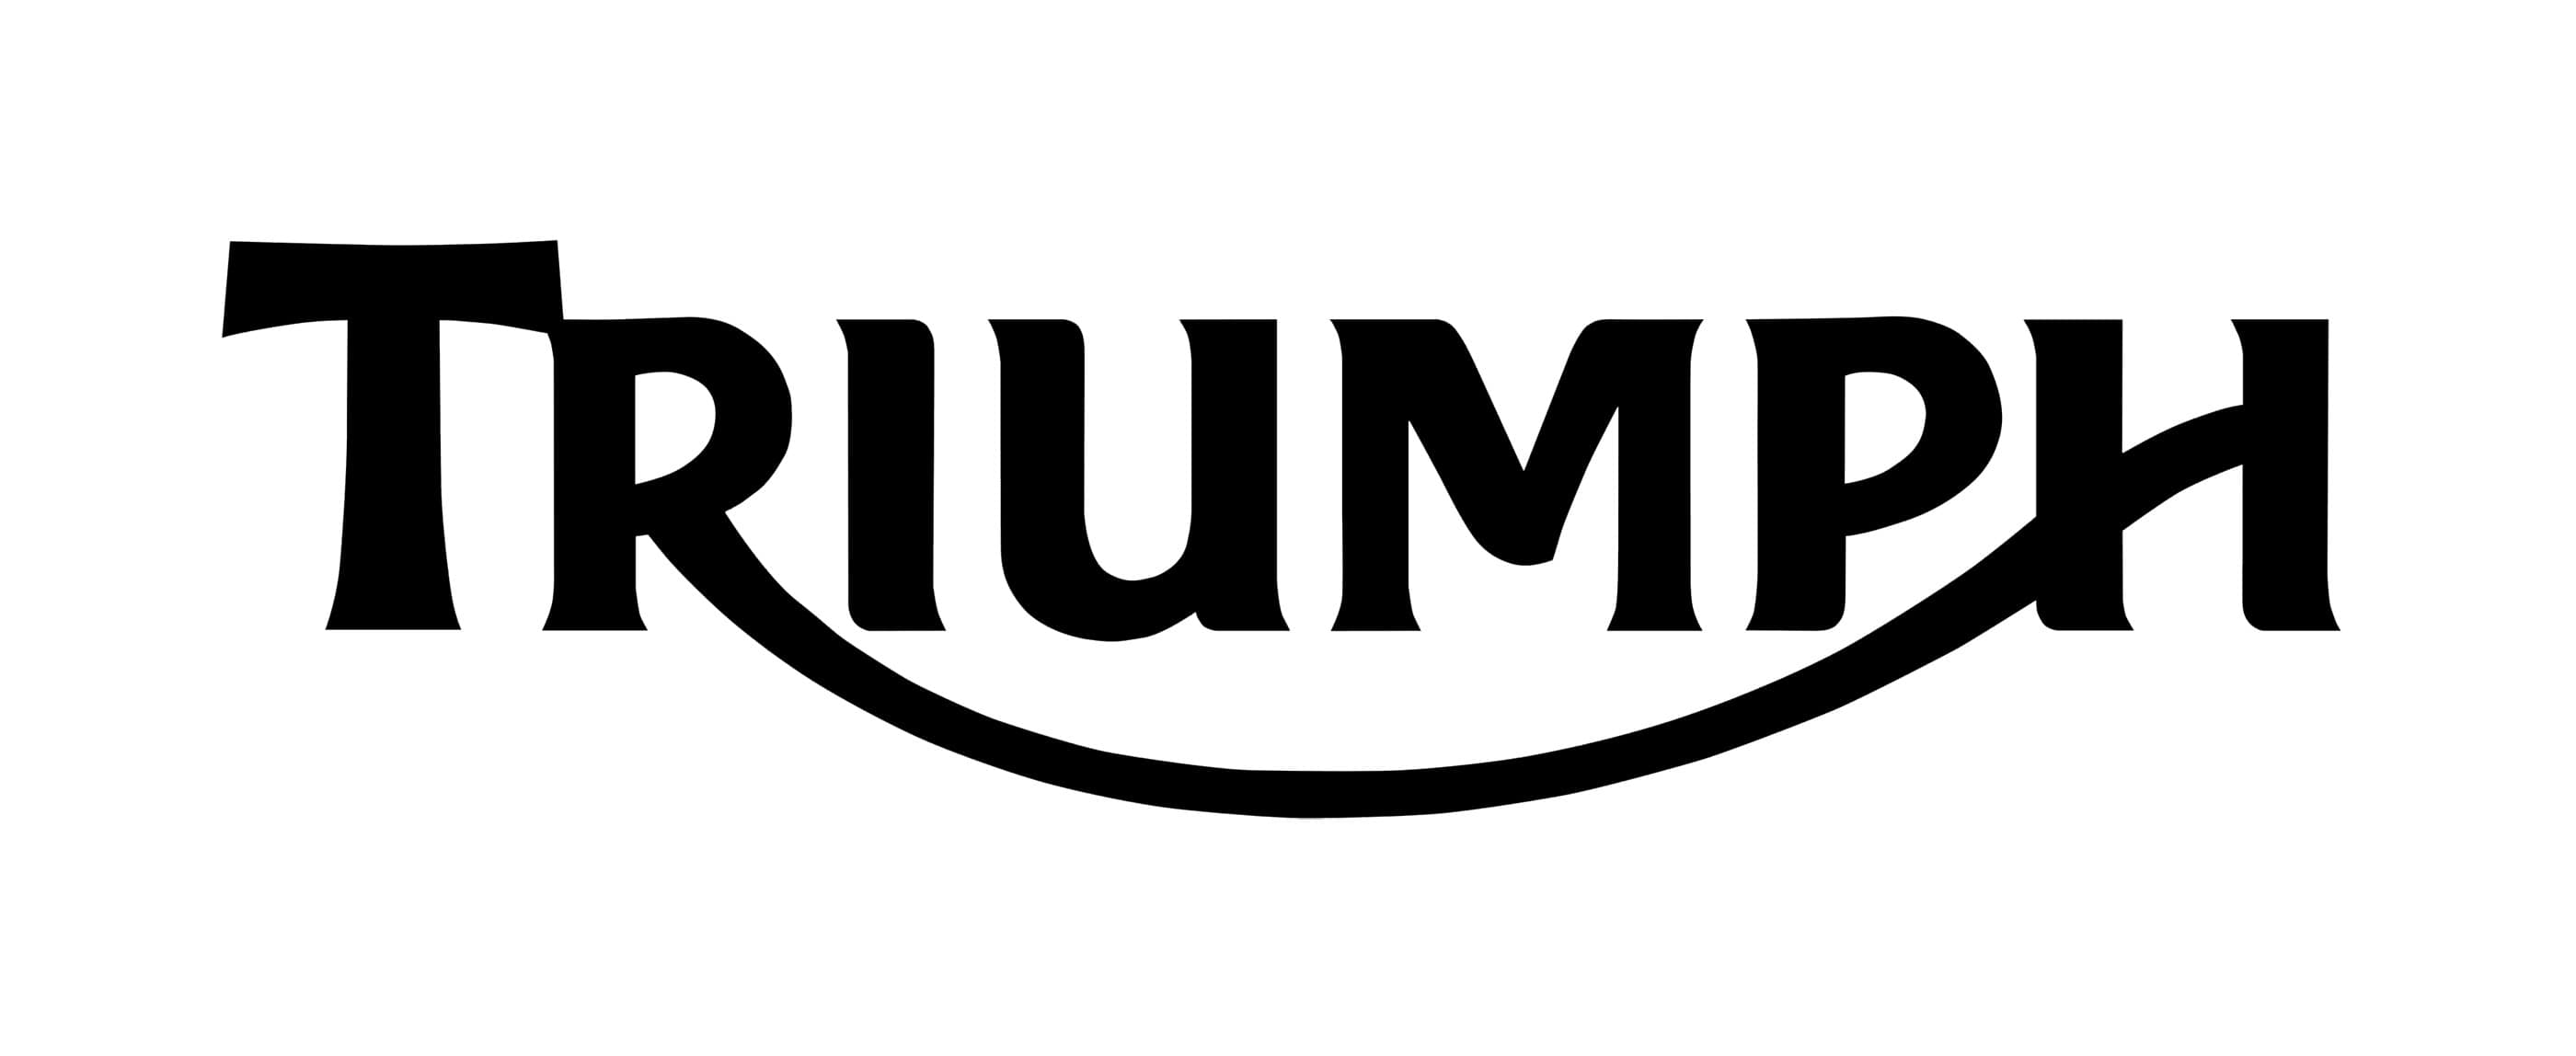 New Triumph Motorcycle Logo - Triumph logo: history, evolution, meaning | Motorcycle Brands